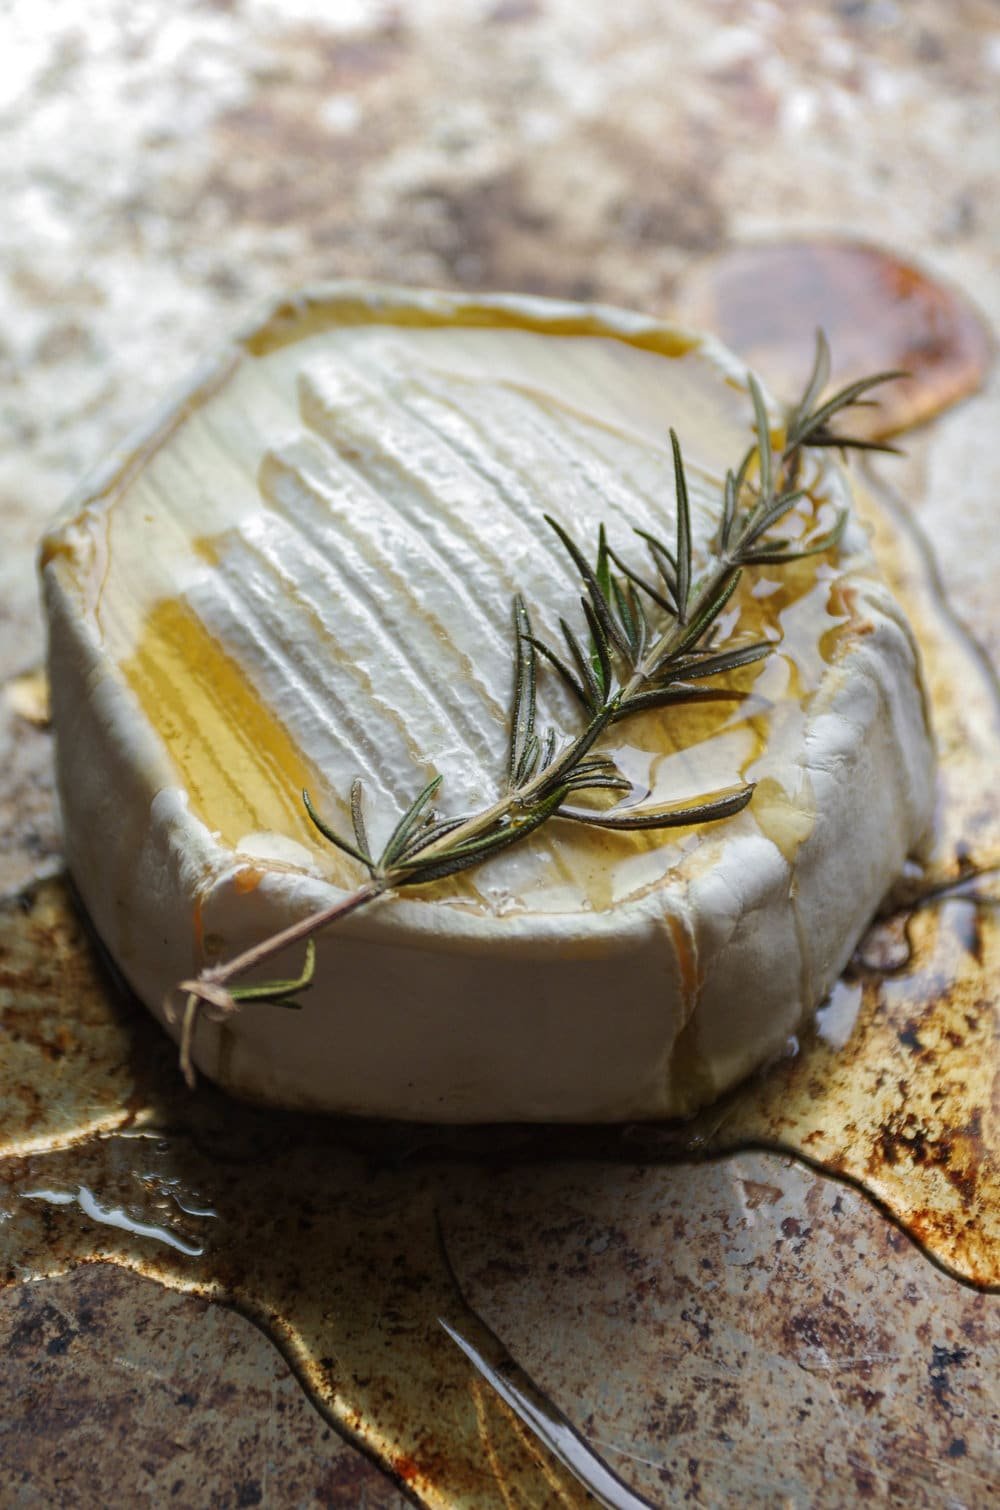 SIde view of baked brie covered in warm dripping honey and charred sprig of fresh rosemary.